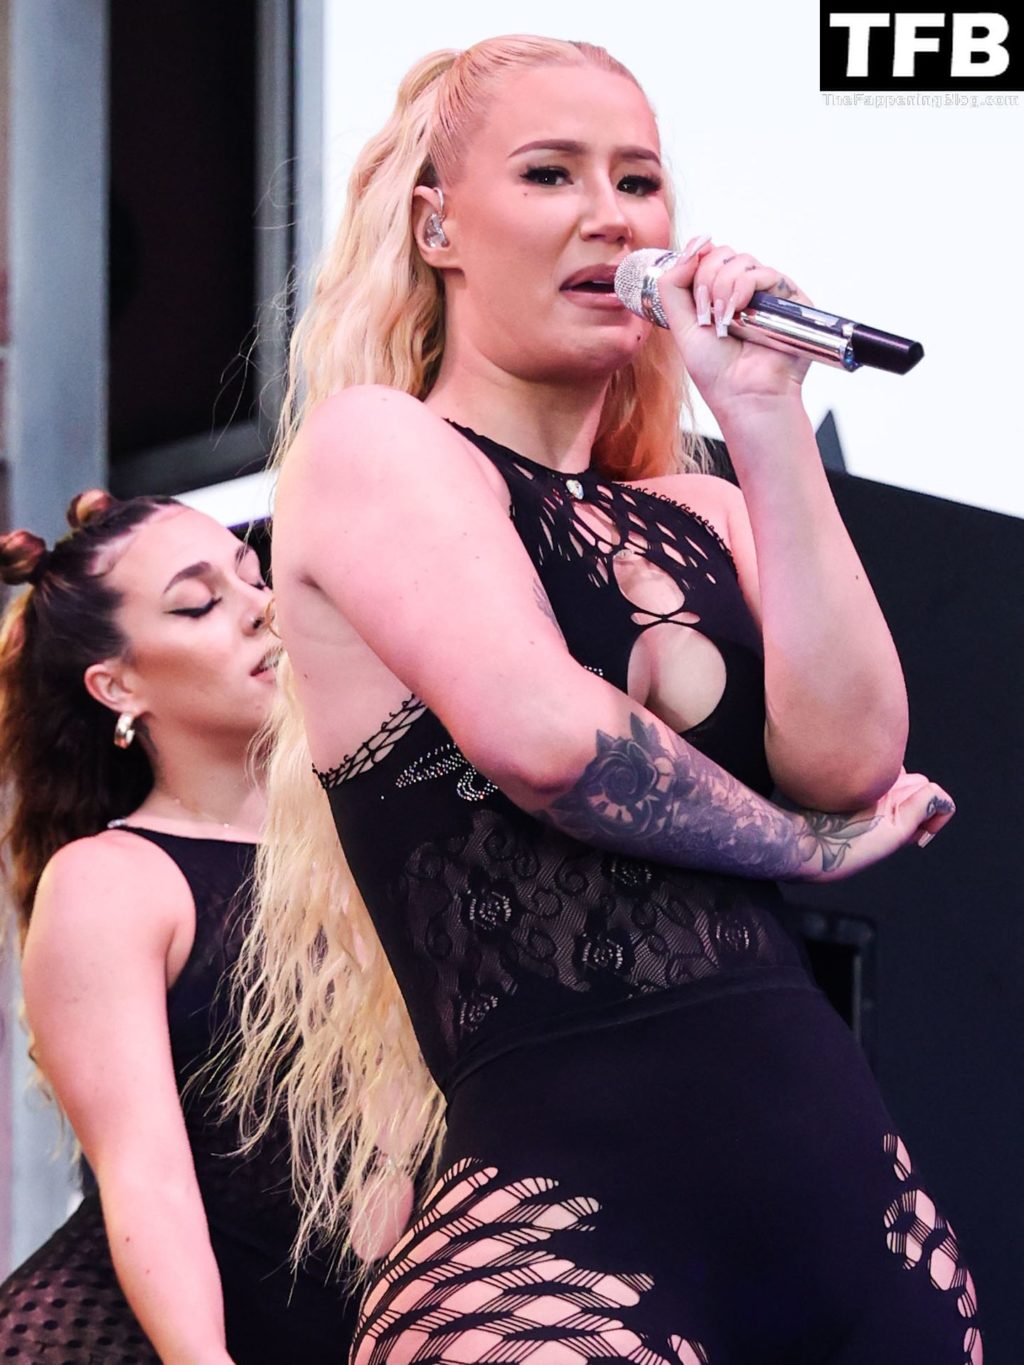 Iggy Azalea Performs at The 39th Annual Long Beach Pride Parade and Festival in Long Beach (150 New Photos)